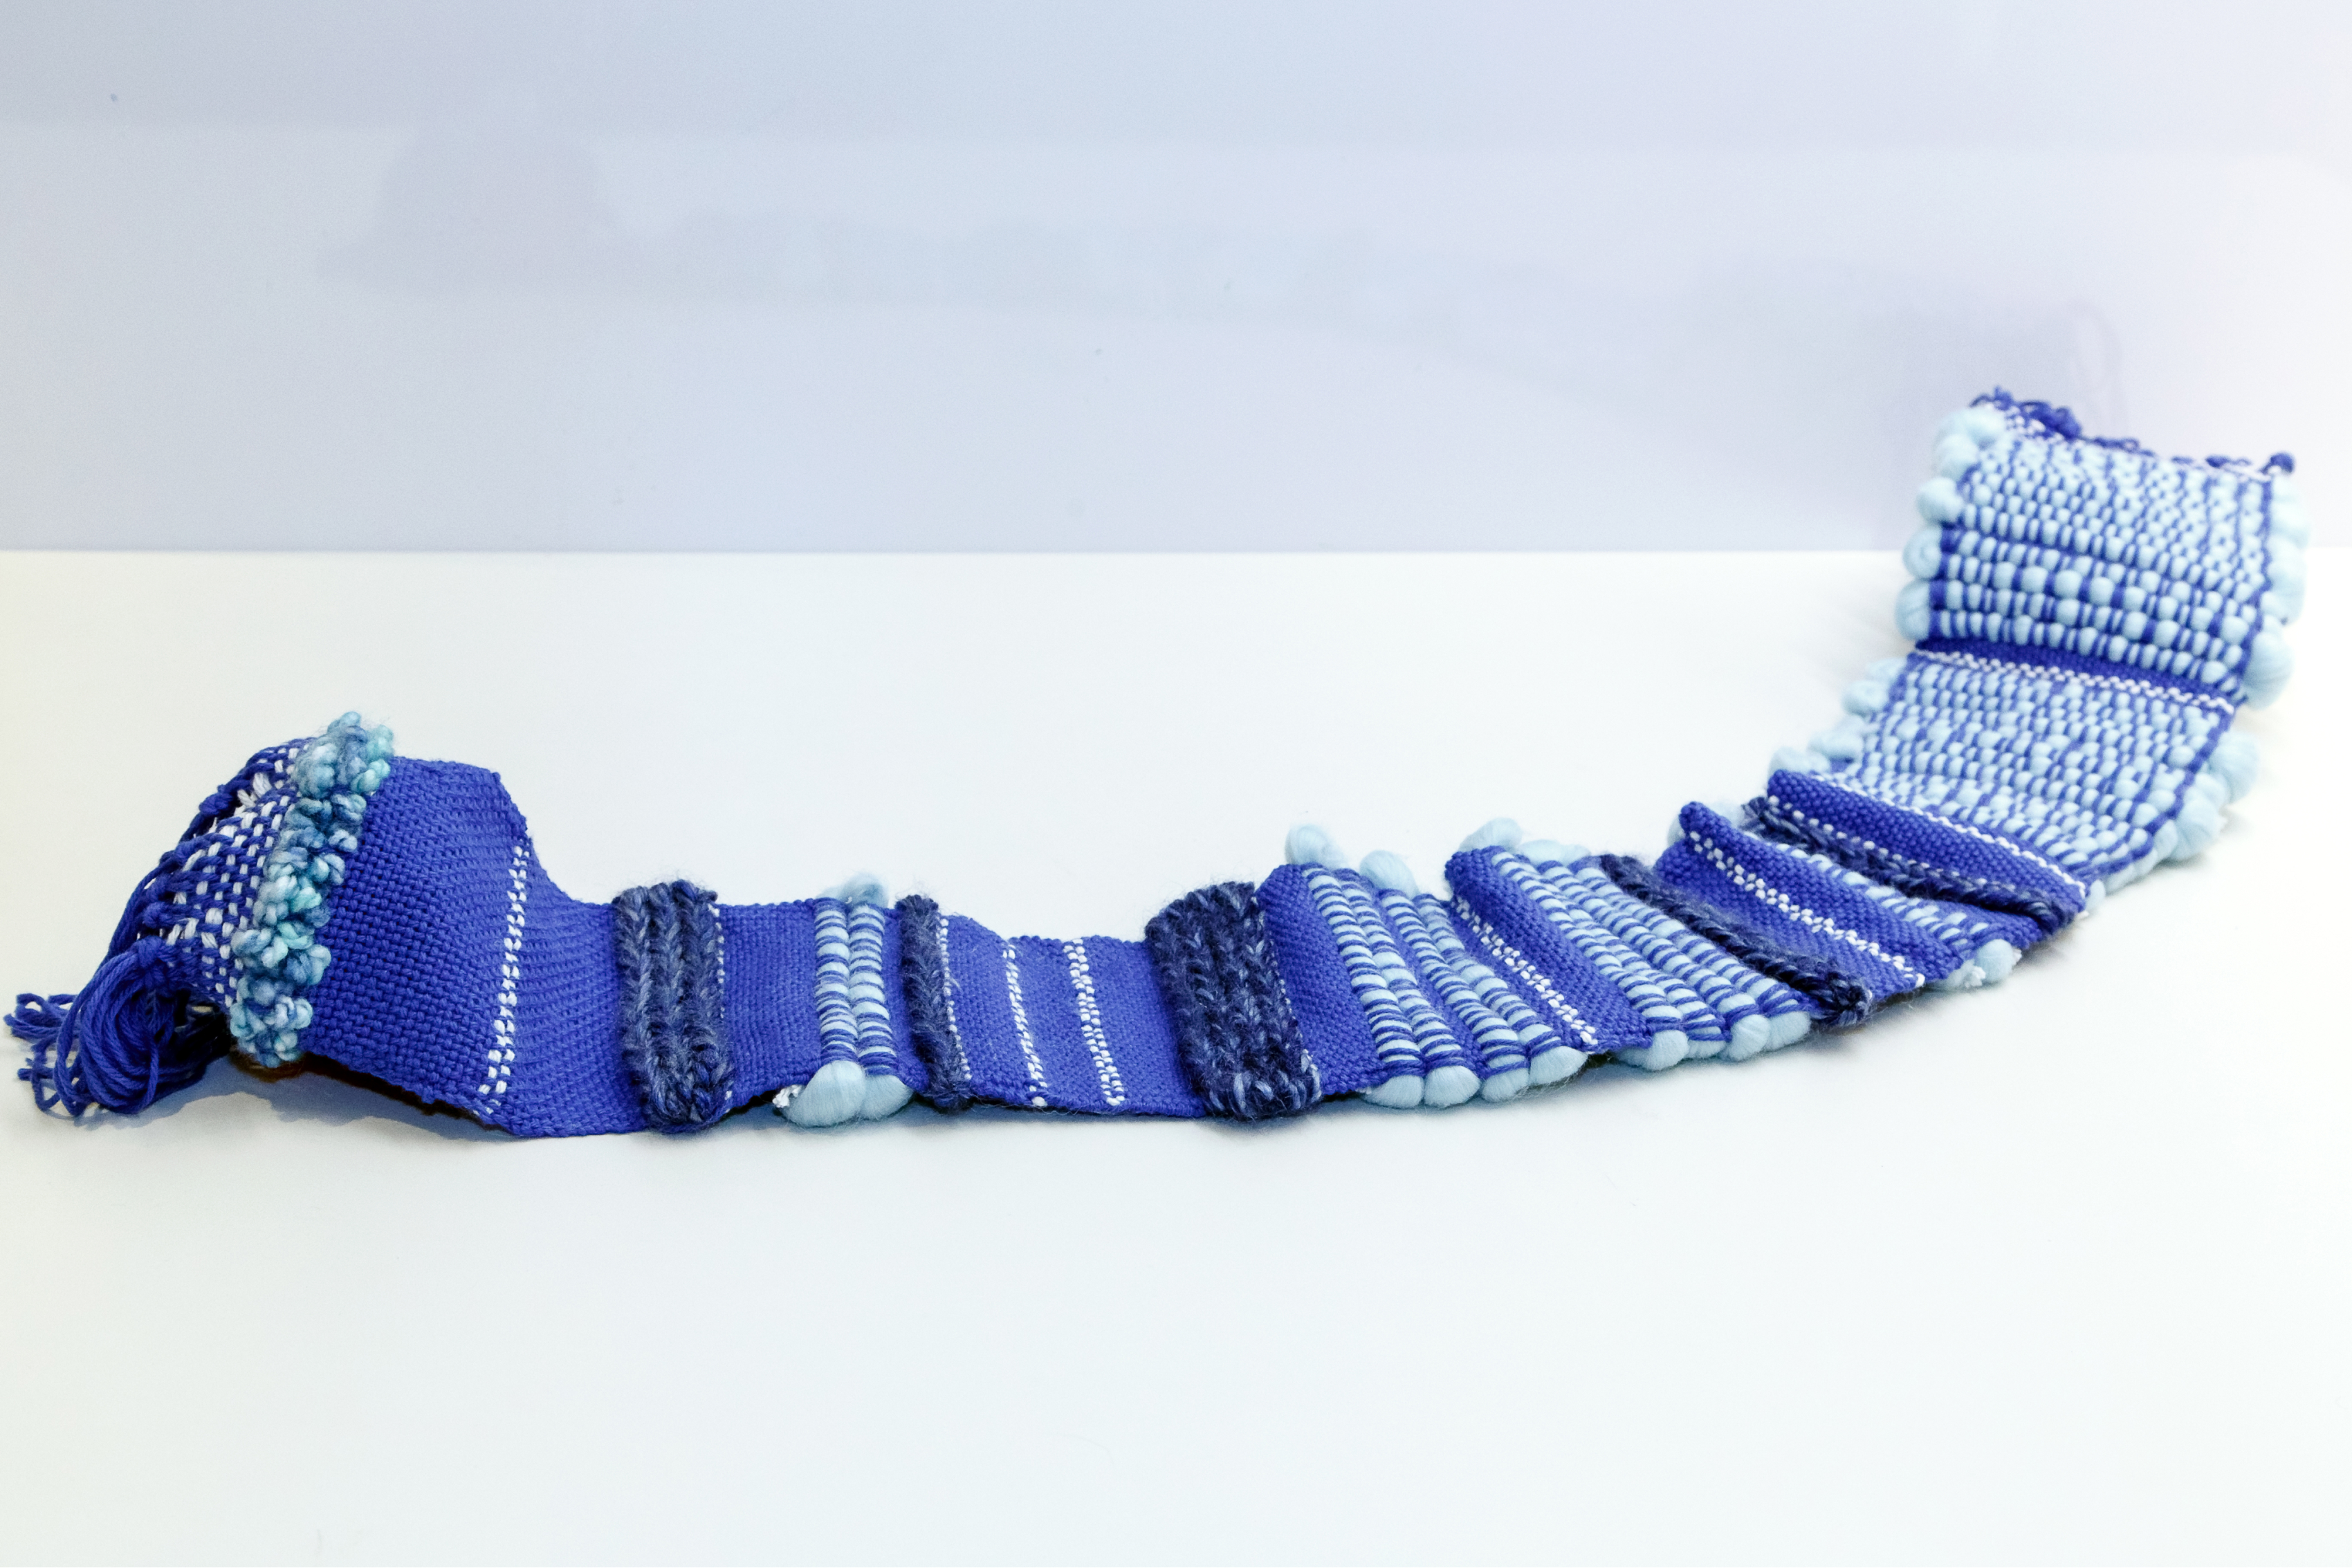 A scarf with alternating bands of blue fabrics resting on a table.